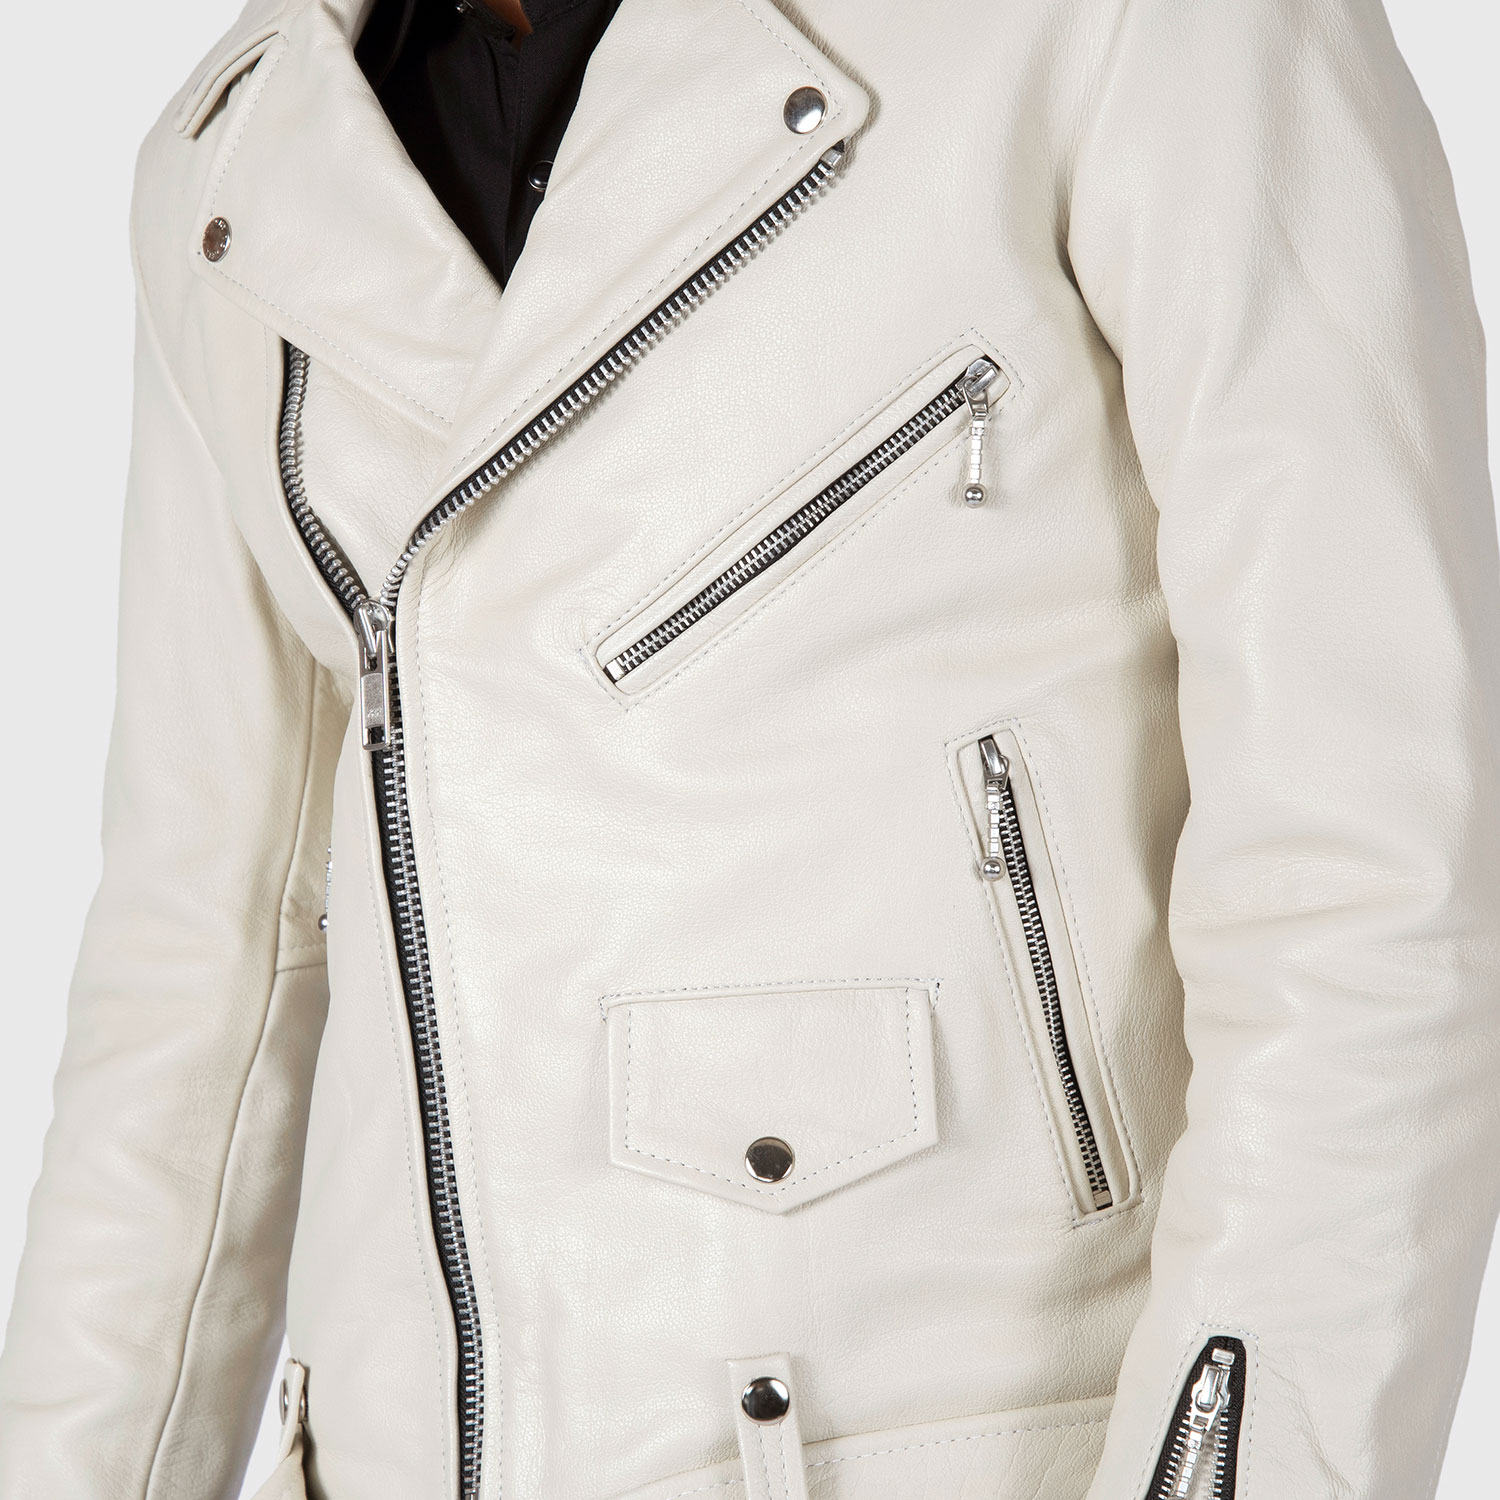 White, Navy and Leather Jacket - THE STYLING DUTCHMAN.